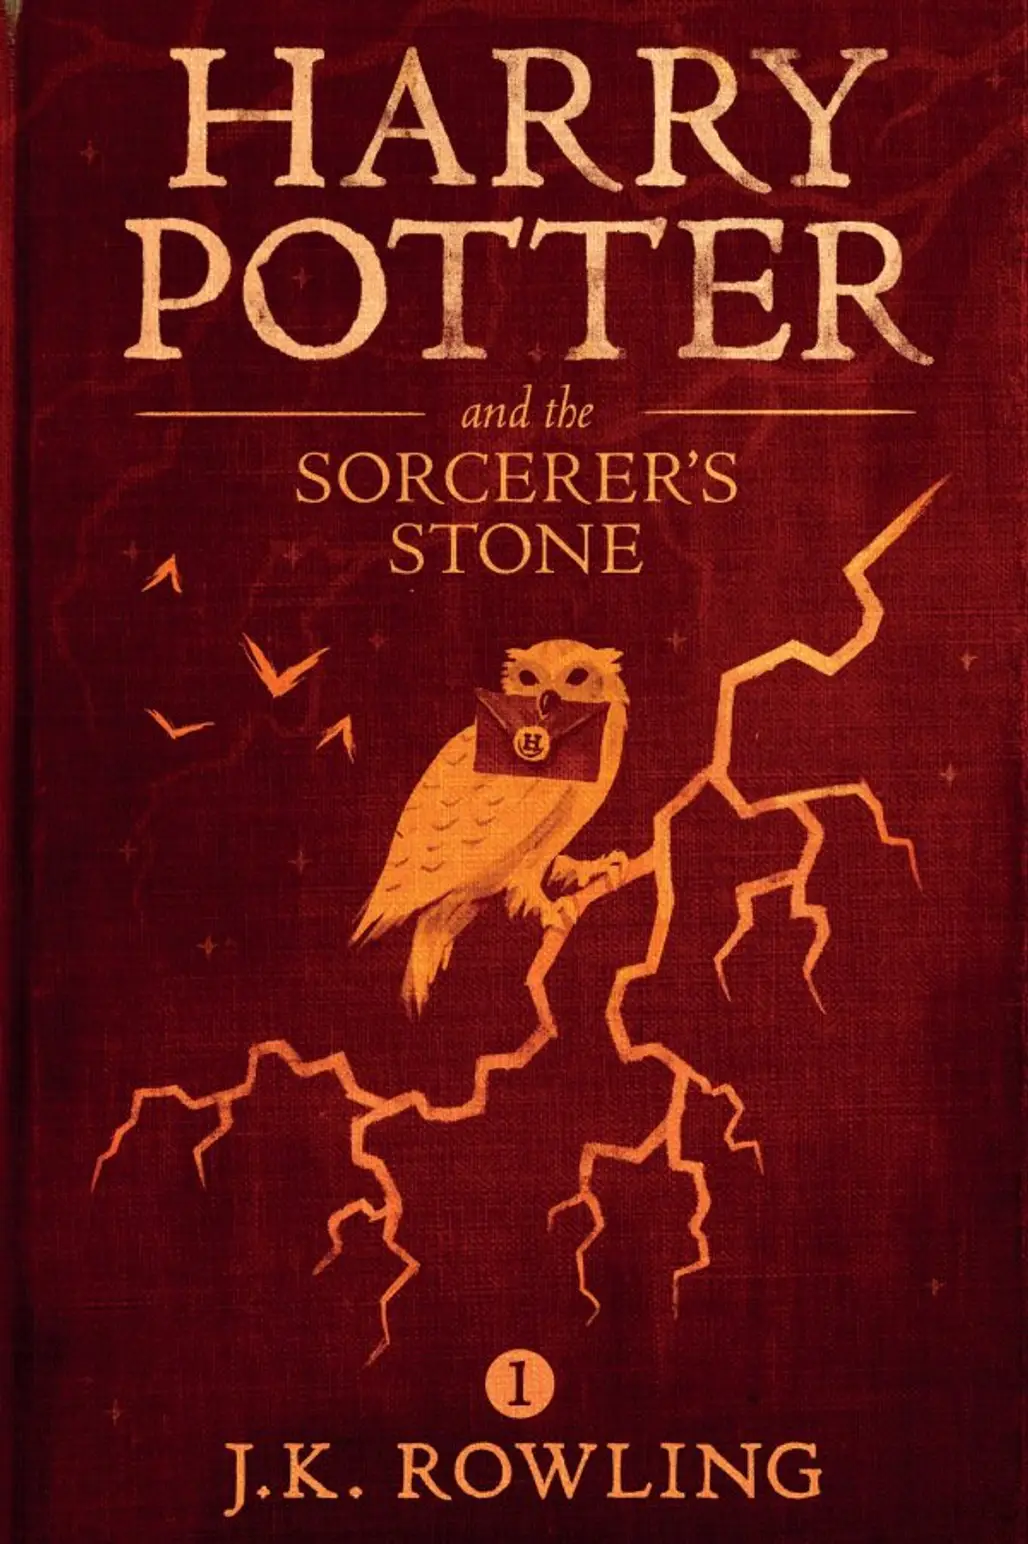 Harry Potter and the Sorcerer's Stone, J. K. Rowling